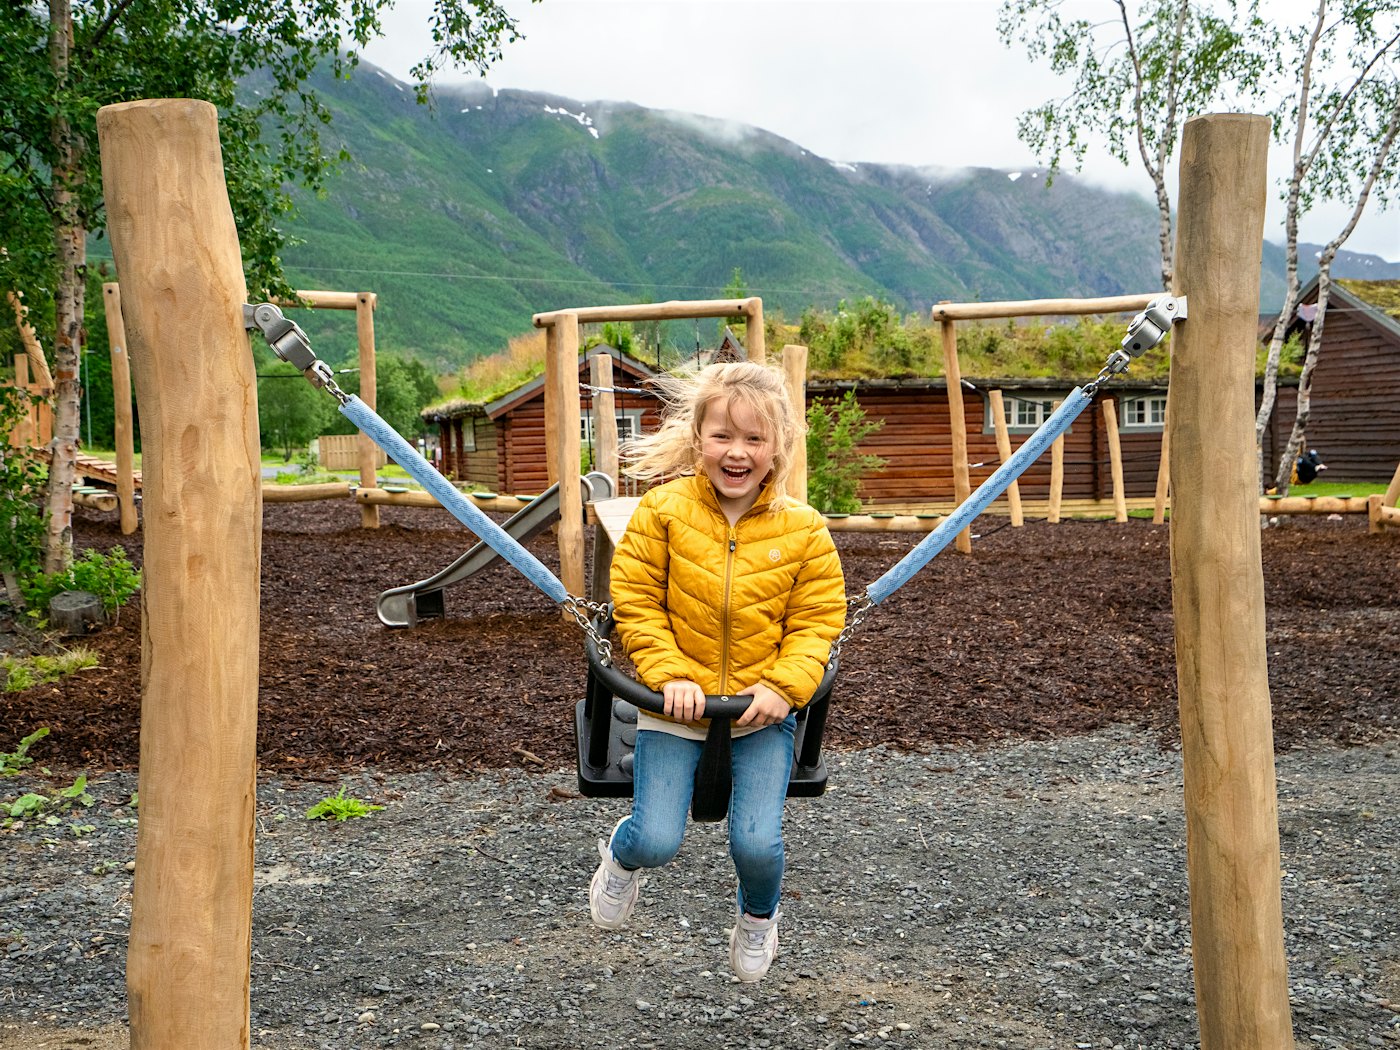 Girl remembers on playground, with mountains in the background. Photo